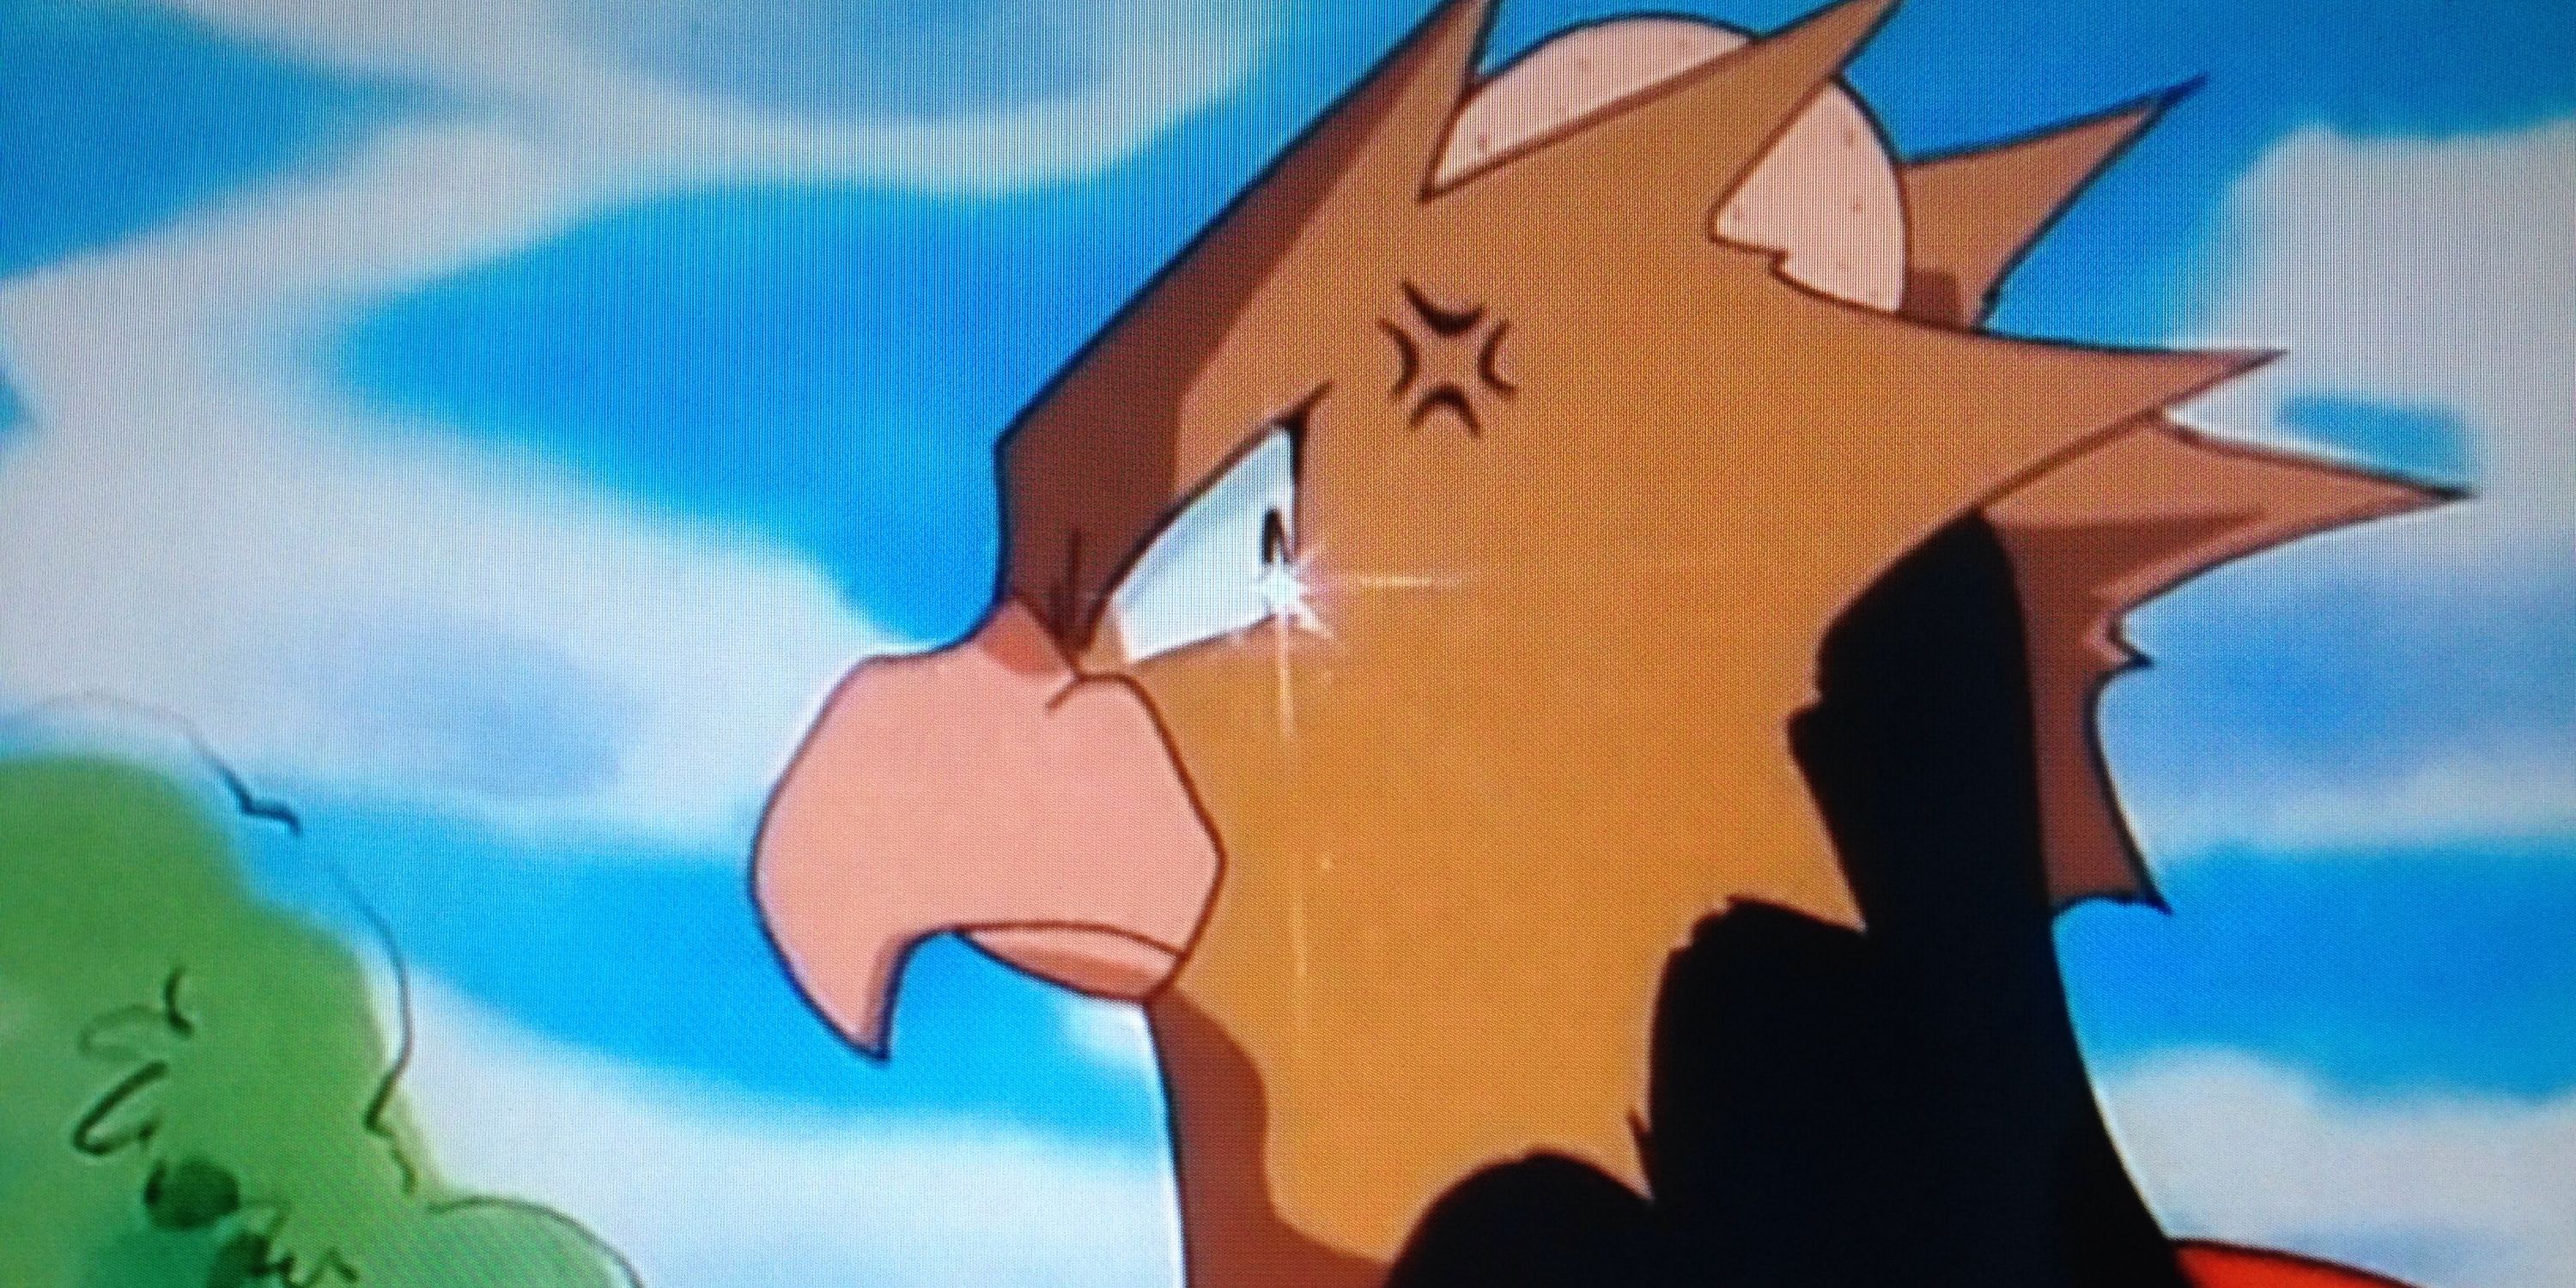 Pokémon 10 Terrible Things Ash Has Done In The Anime (That Every Fan Ignores)